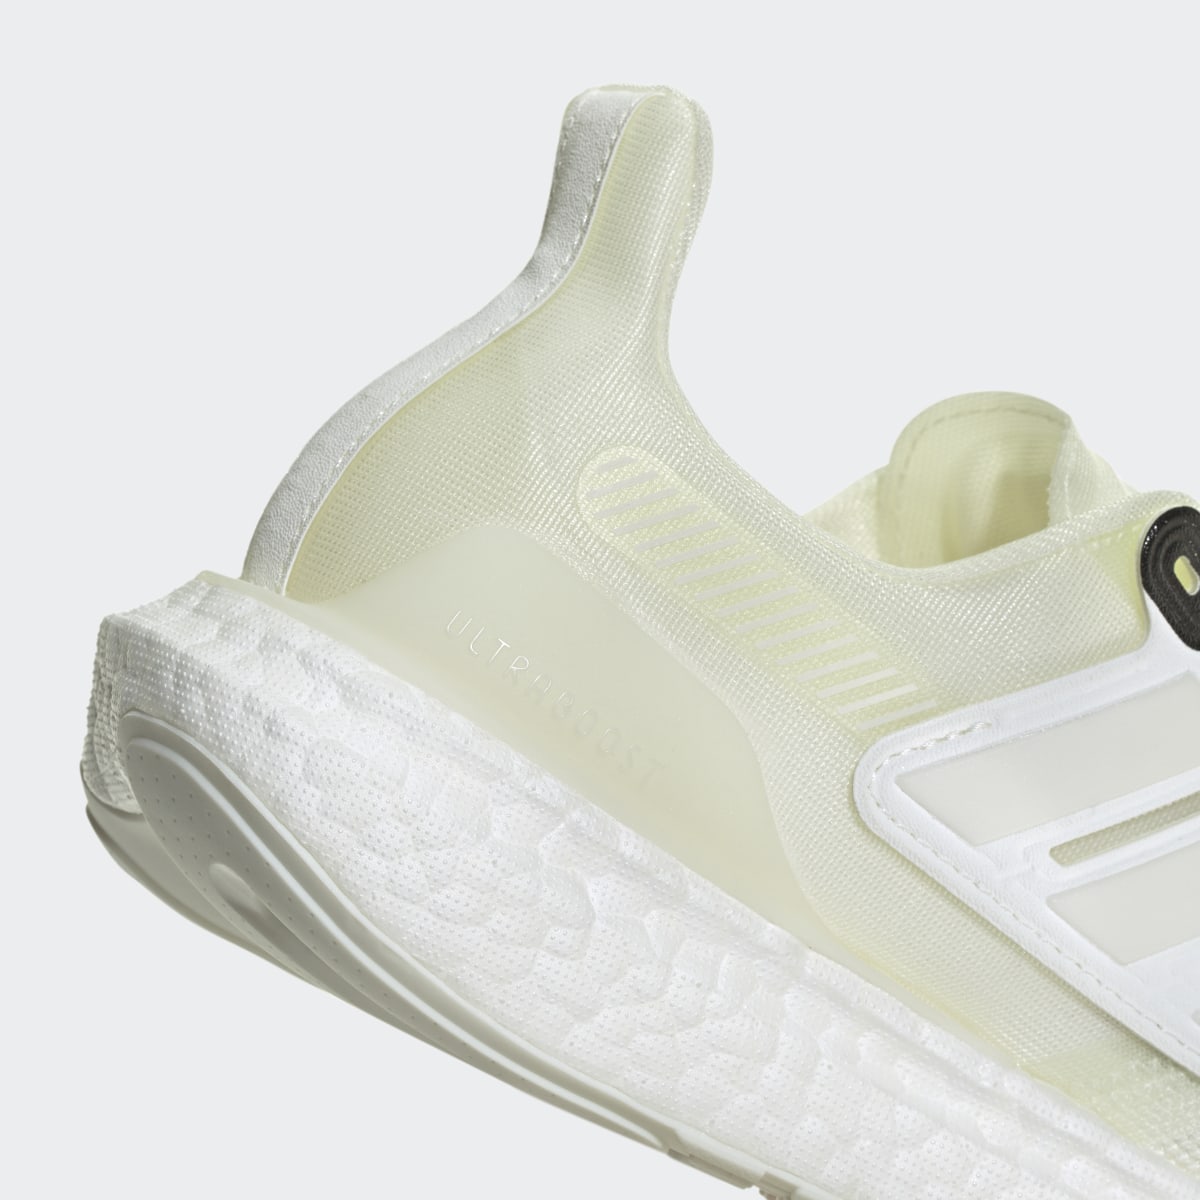 Adidas Ultraboost Made to Be Remade 2.0 Running Shoes. 4